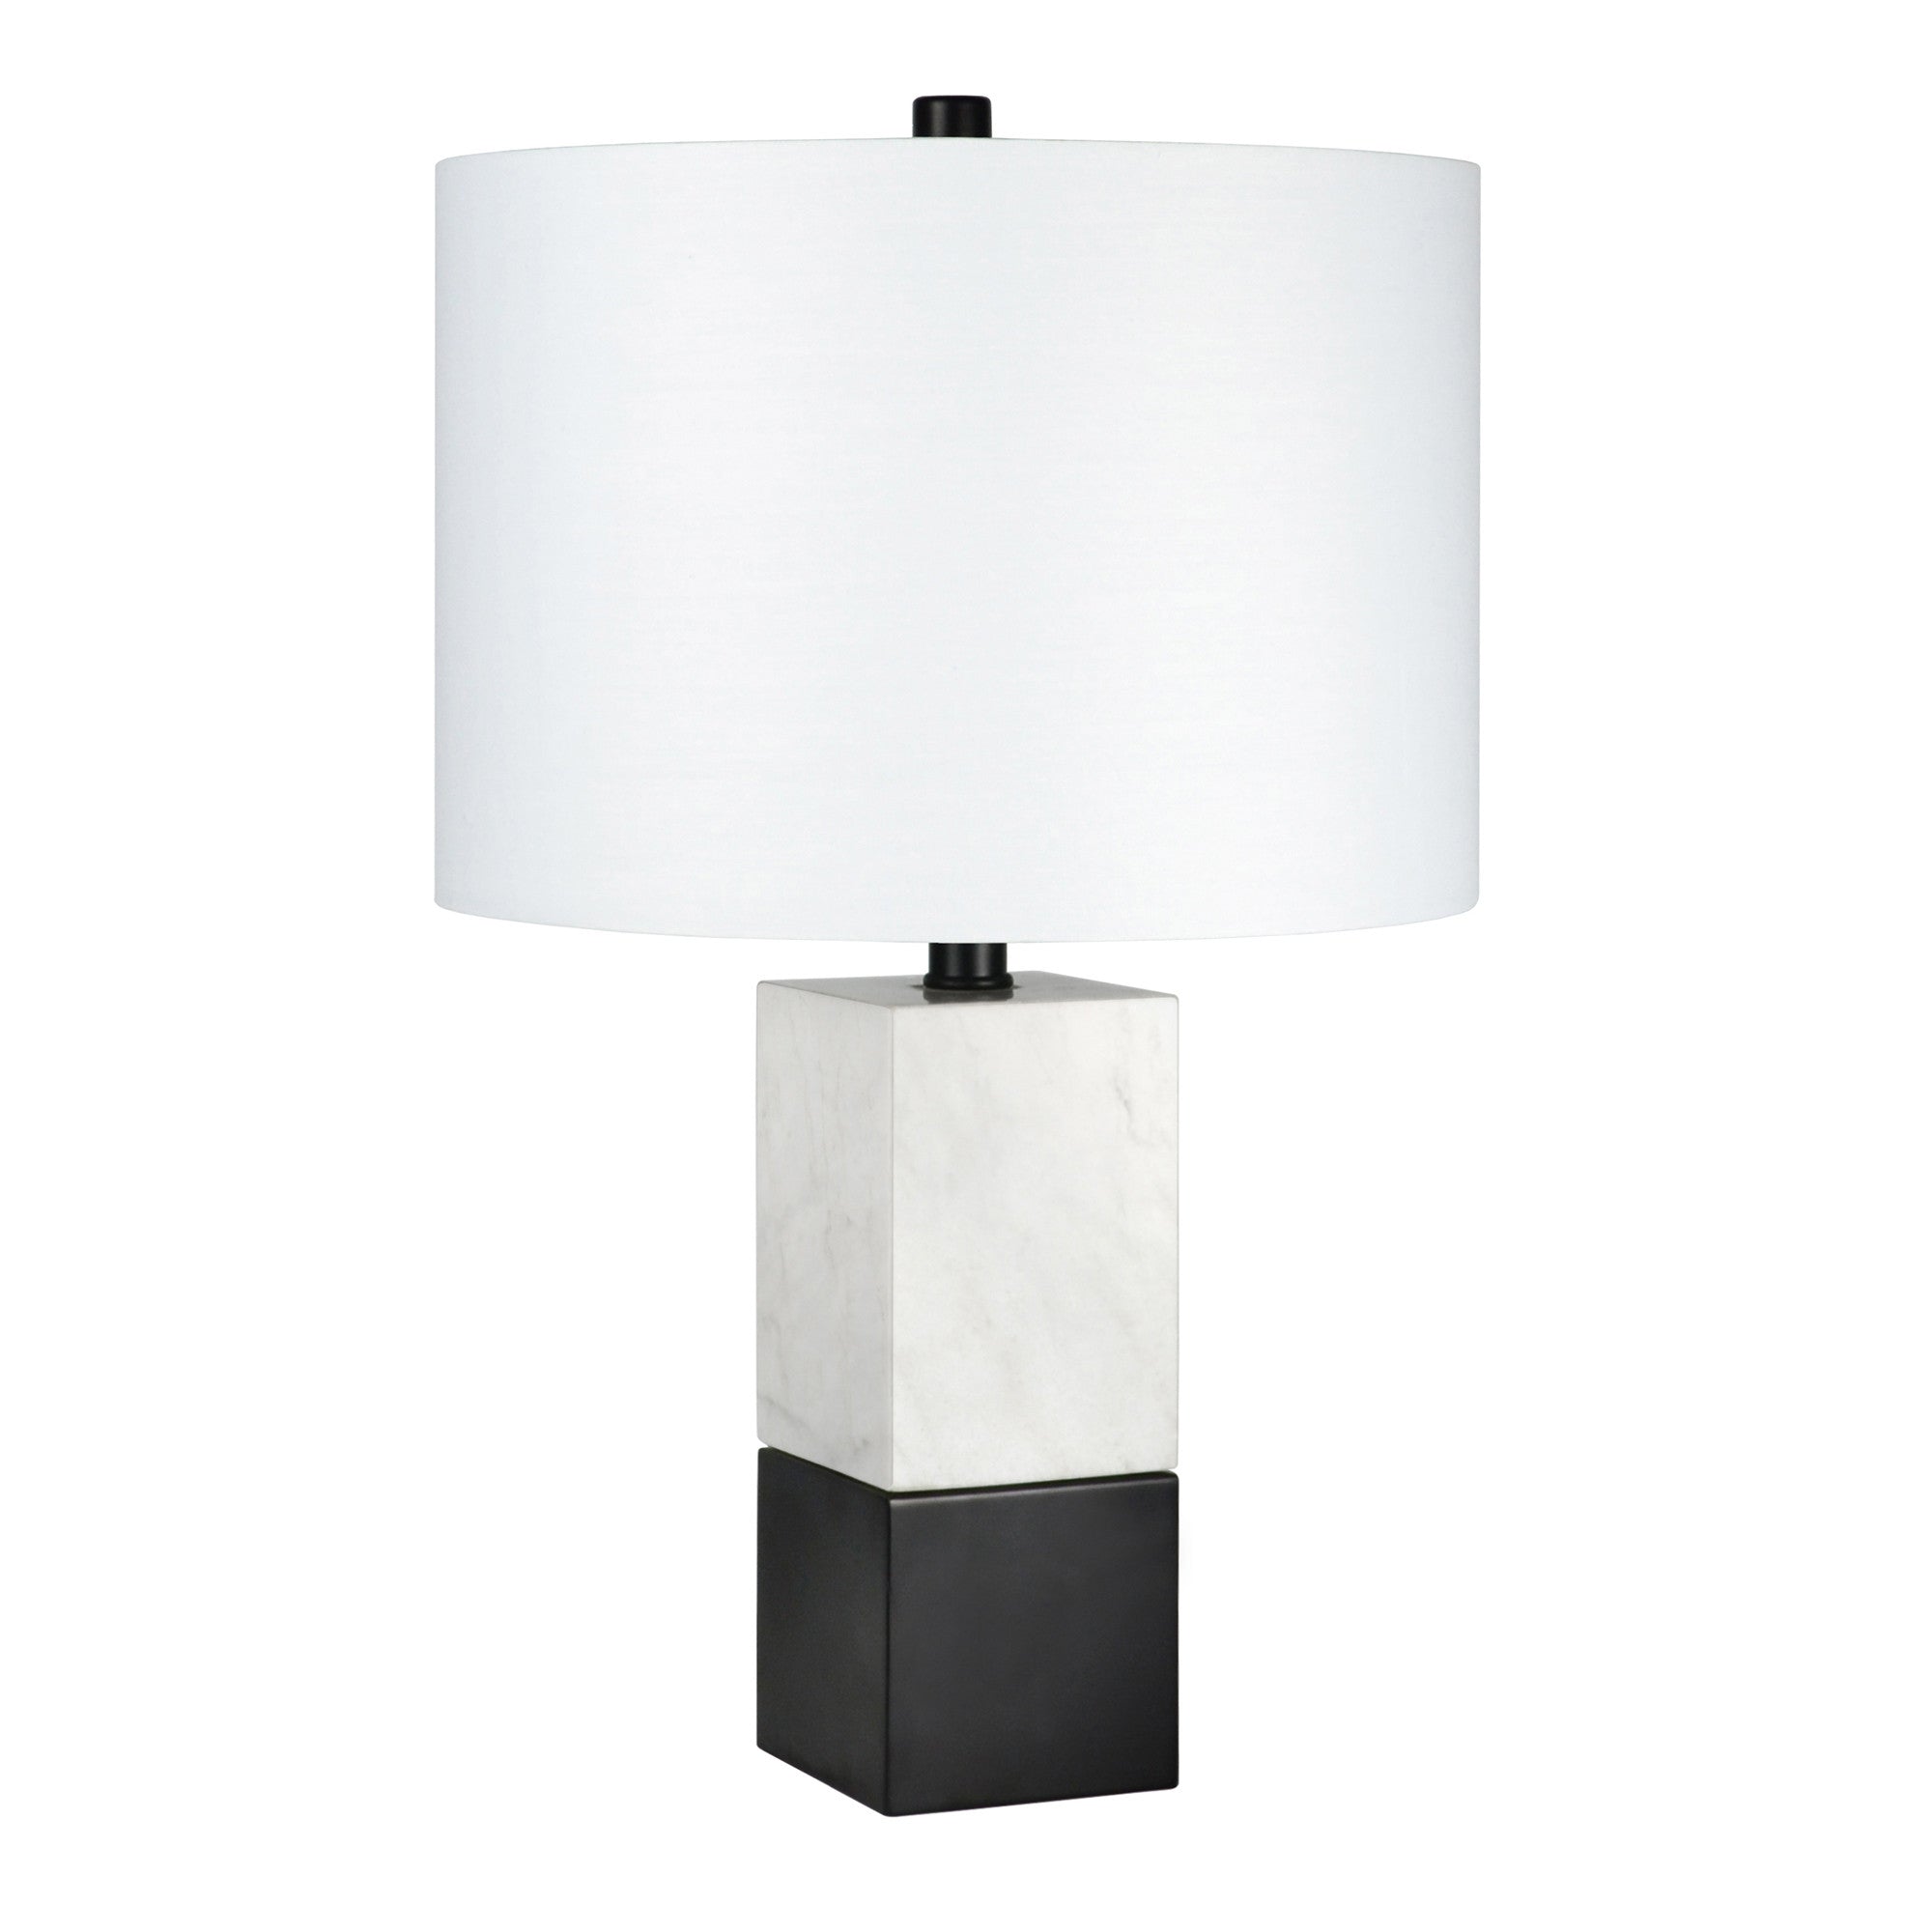 21" Black and White Marble Table Lamp With White Drum Shade